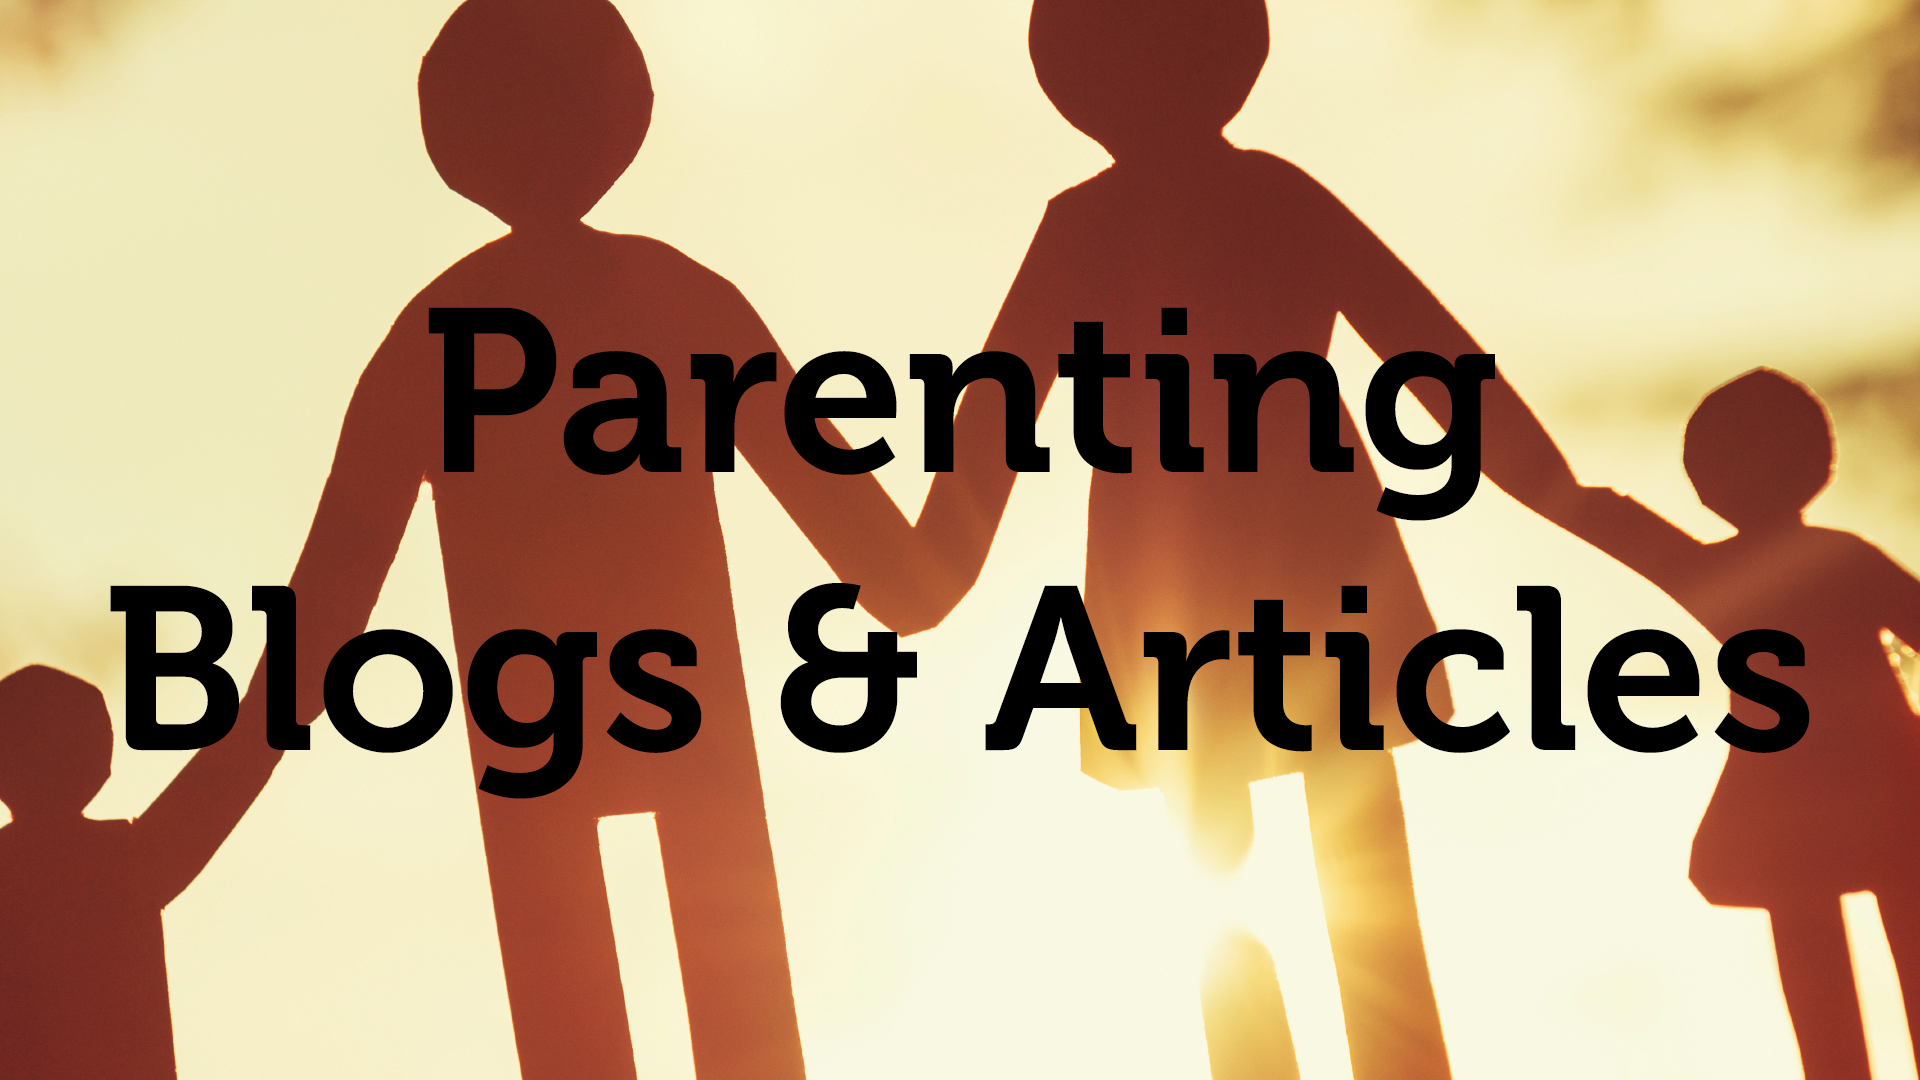 Parenting Articles and Blogs